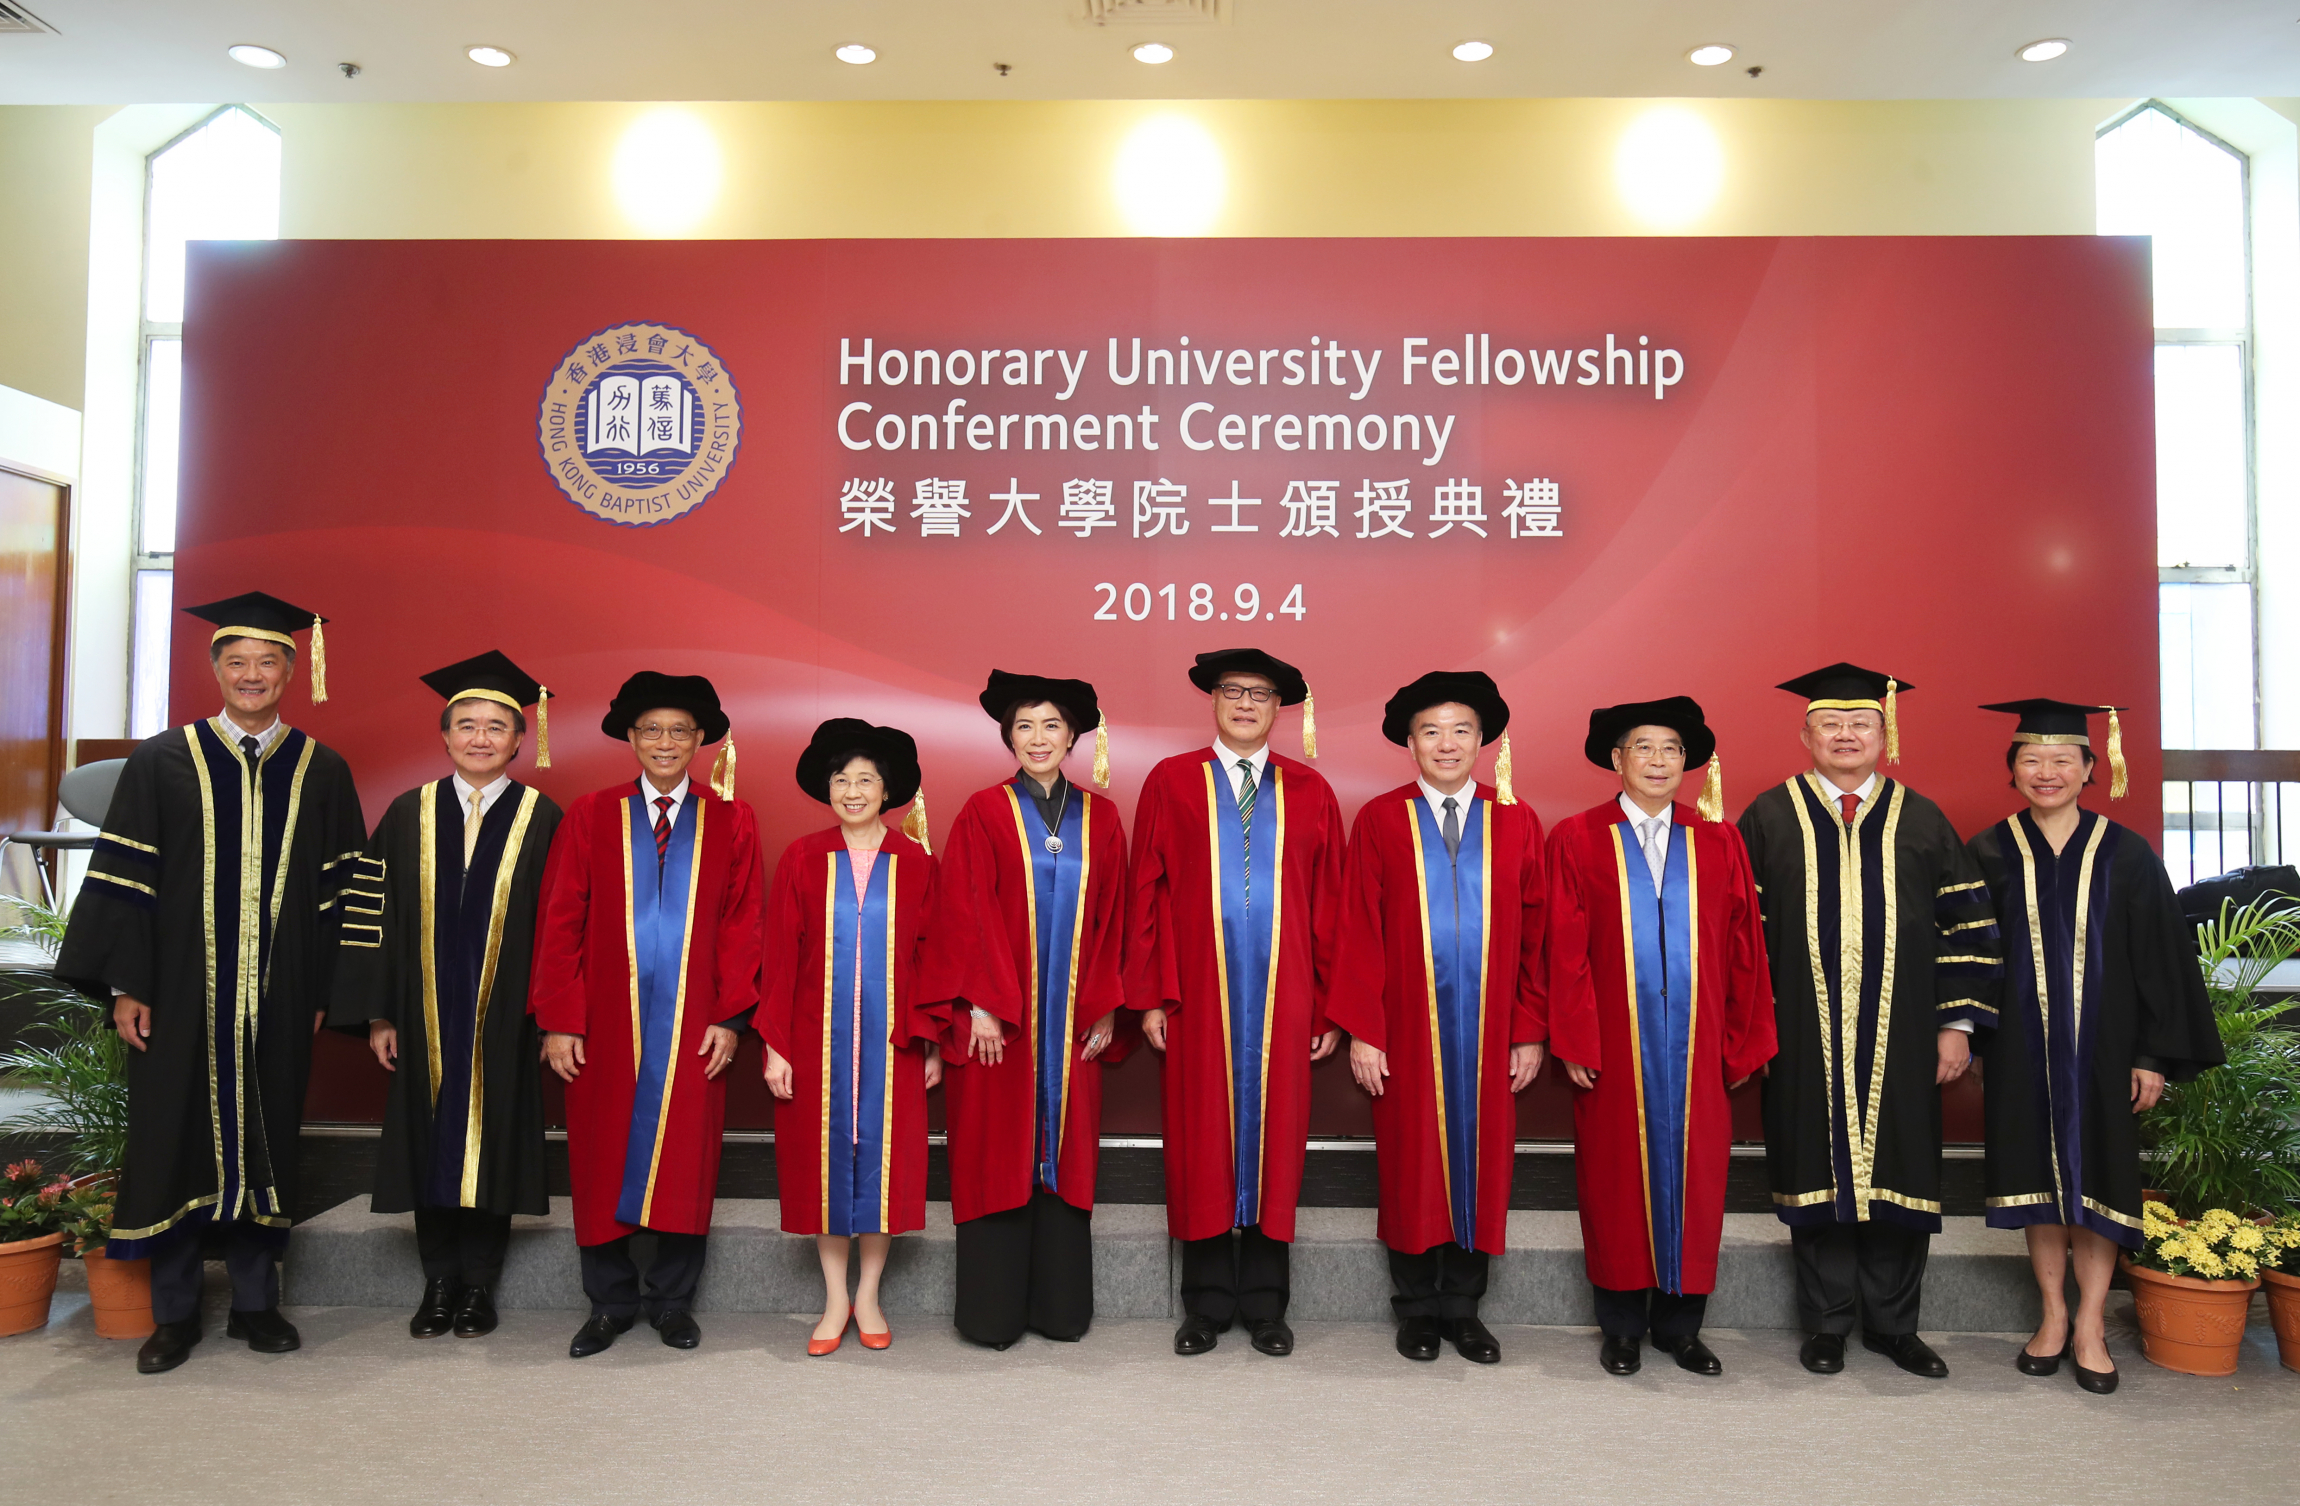 At the HKBU’s 63rd Convocation and Honorary University Fellowship Conferment Ceremony: (from left) HKBU Council Deputy Chairman Mr Andrew Yao, President and Vice-Chancellor Professor Roland Chin, Mr Cheng Sing-yip, Dr Polly Cheung, Ms Quince Chong, Mr Francis Law, Dr David Wong, Mr Tsang Wing-wah, HKBU Council Chairman Mr Cheng Yan-kee and Treasurer Ms Rosanna Choi.